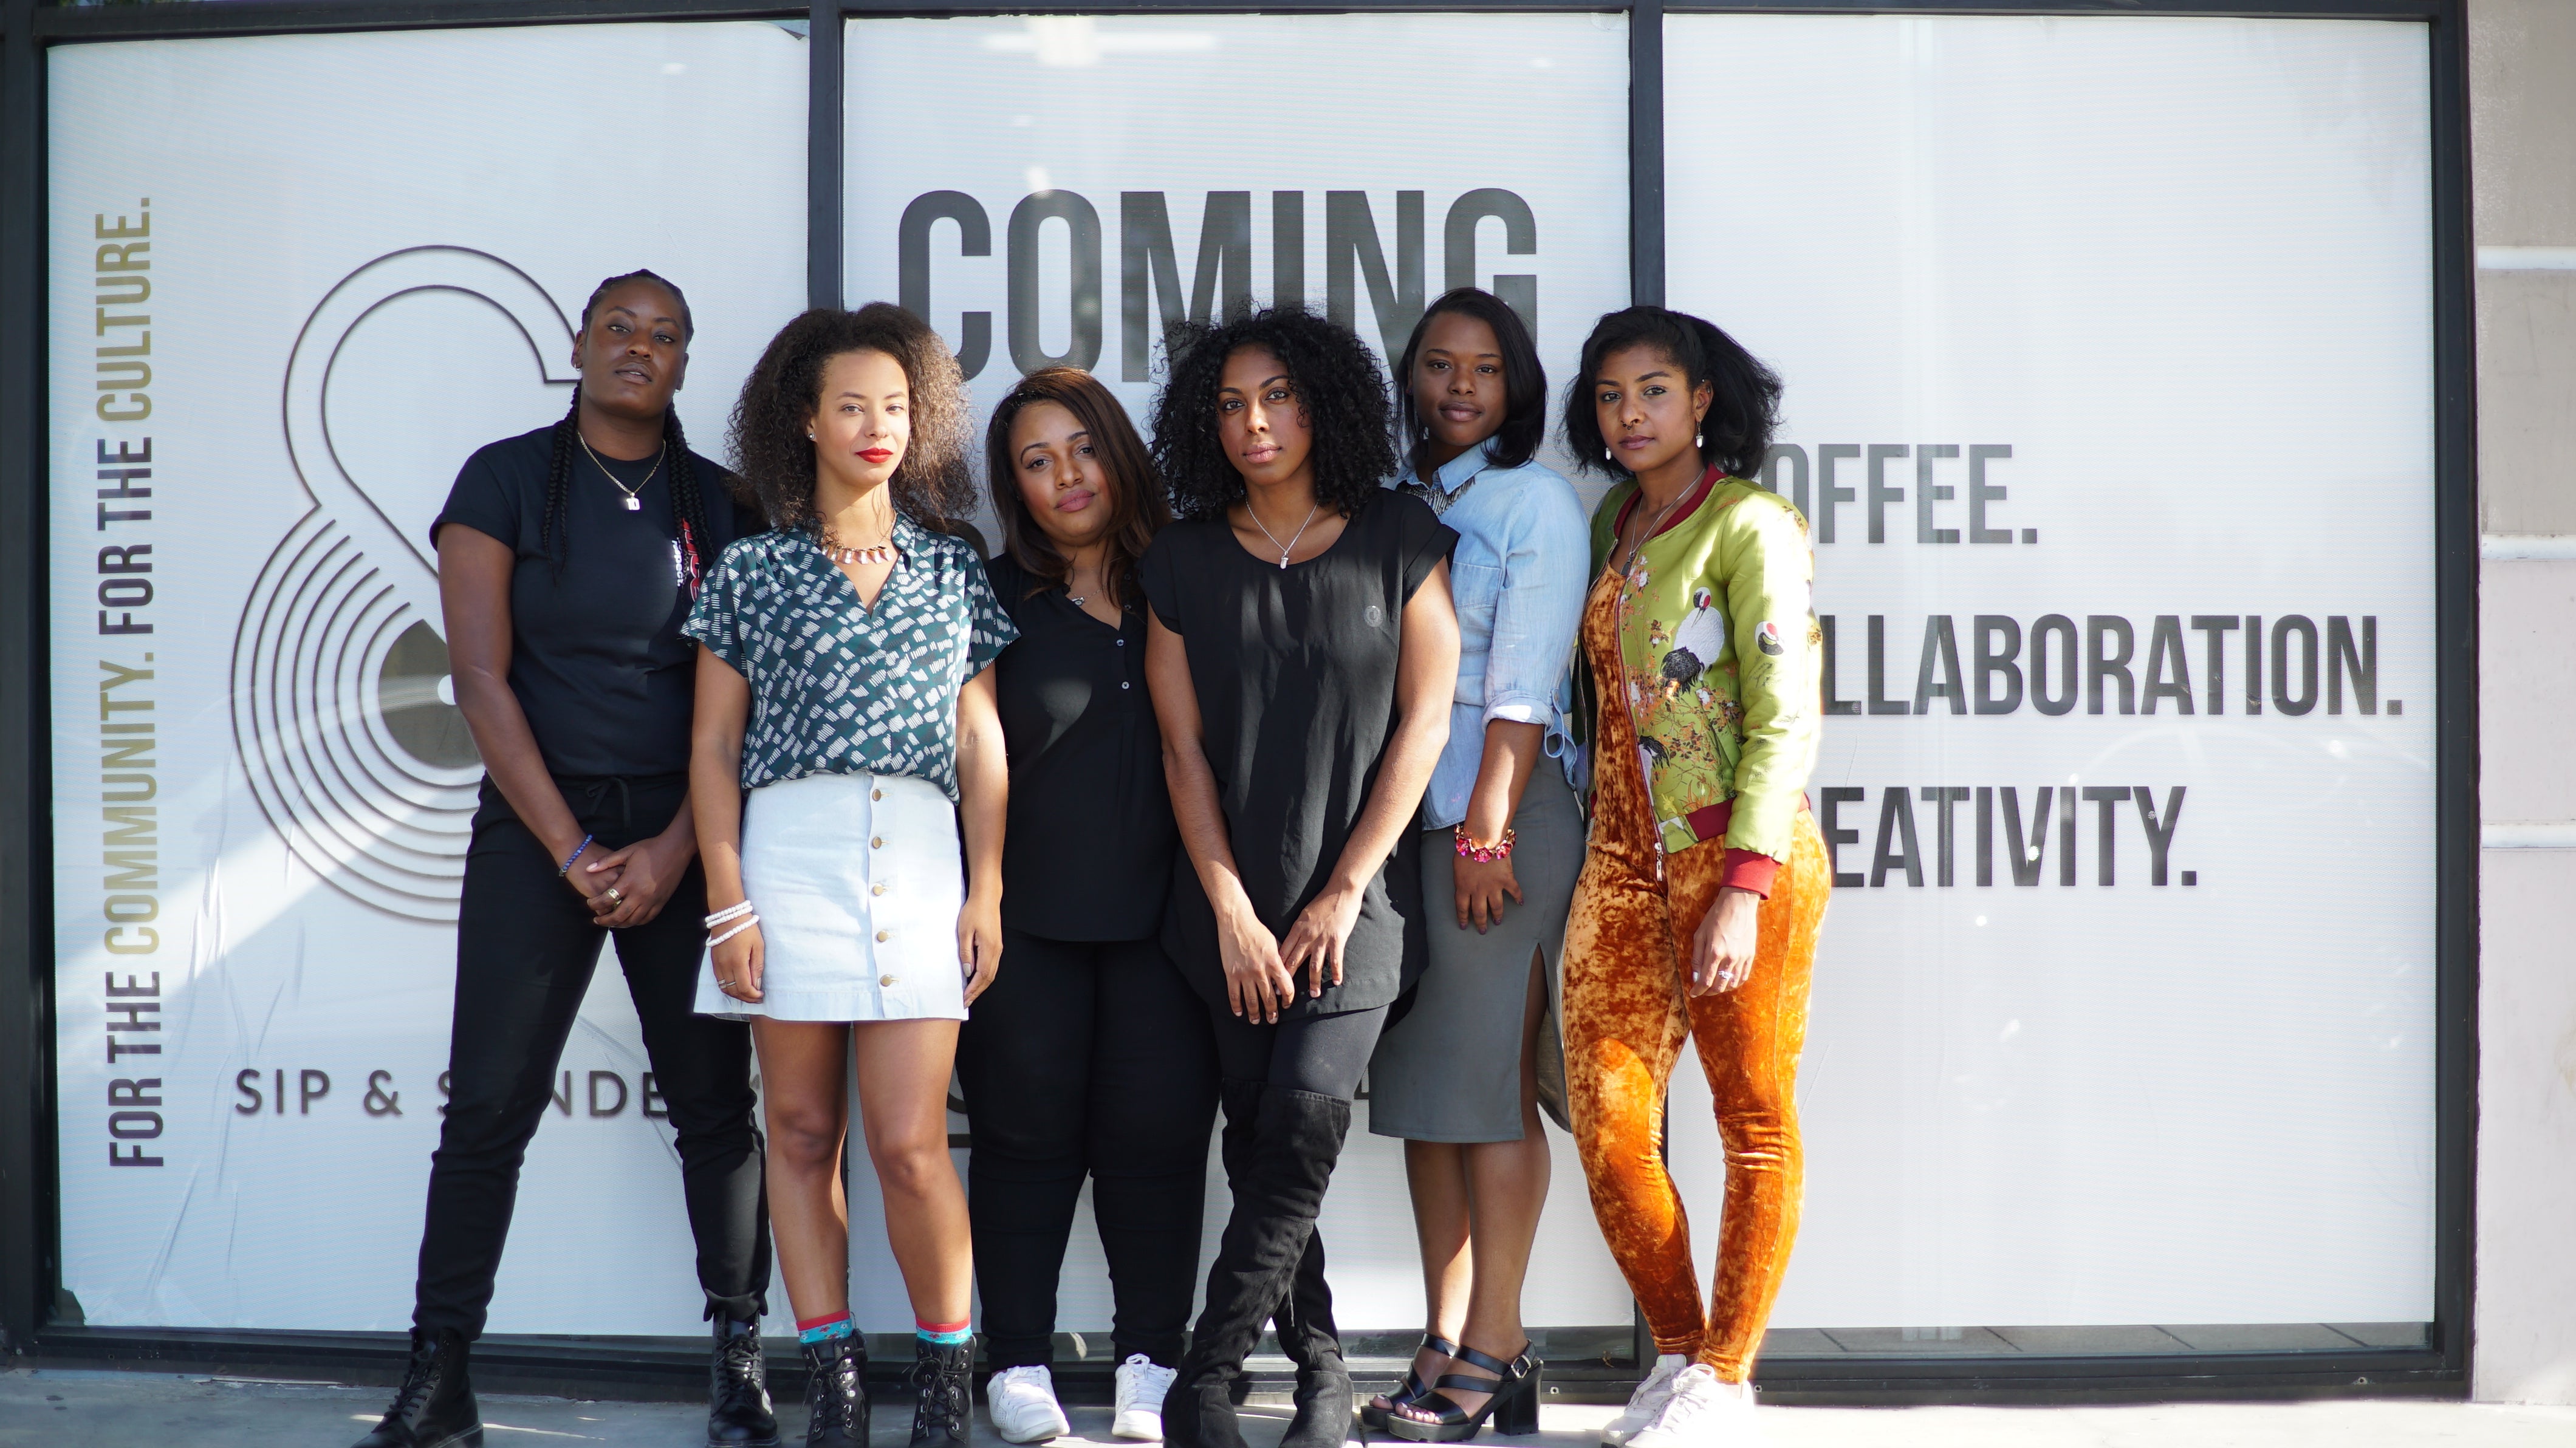 Meet The Women Behind A Black-Owned Coffee Shop Brewing Up Culture And Creating Community
